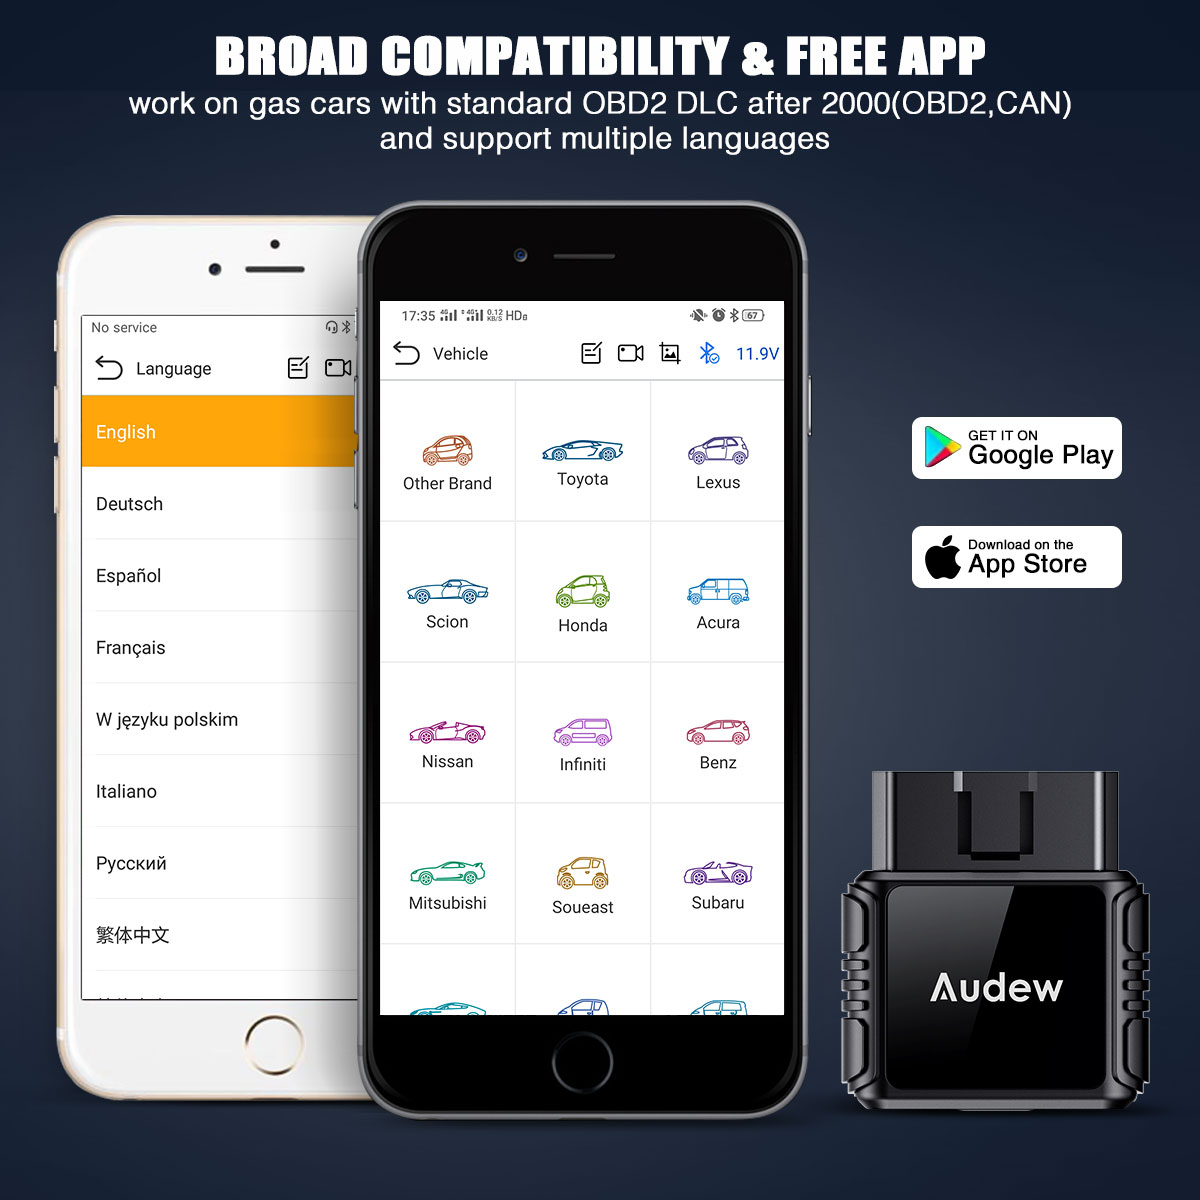 Details about   Mazda 6 Android Apple iOS Phone Bluetooth Car Code Reader Scanner Tool OBD2 